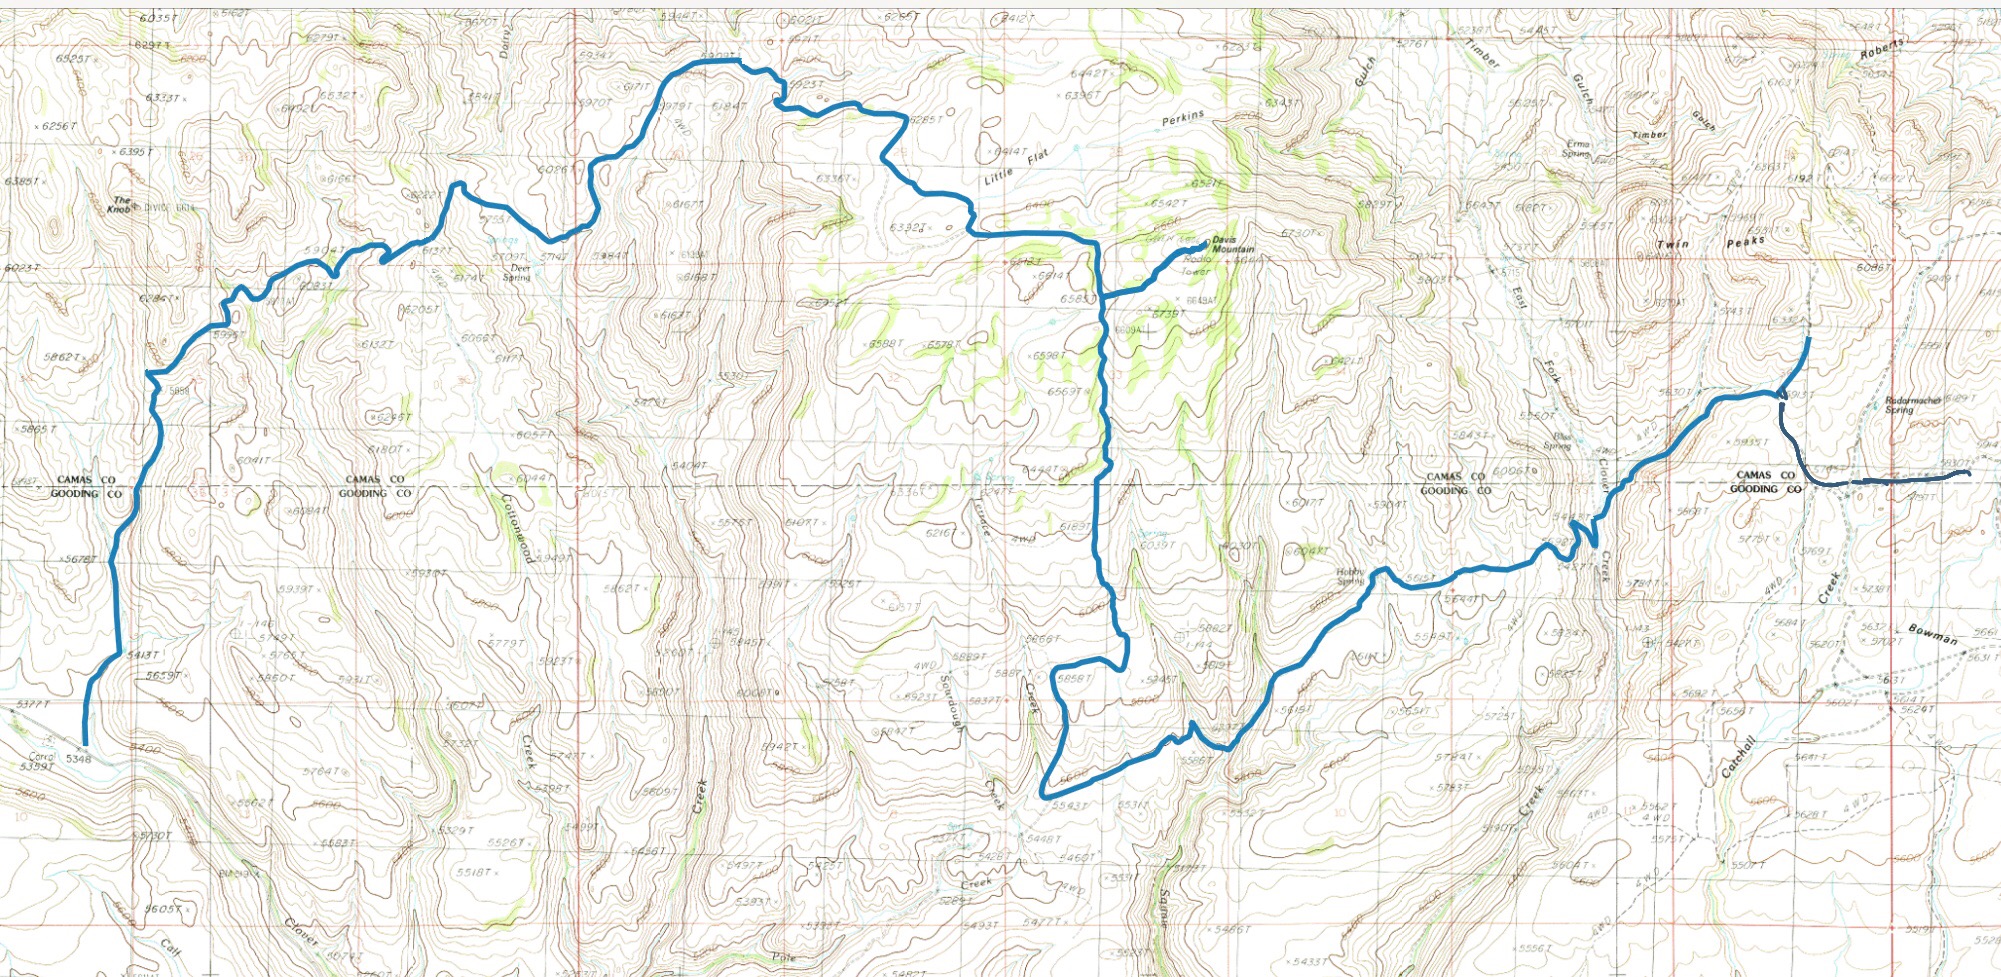 A GPS track for the Davis Mountain Road. This road requires a 4WD with skid plates, all-terrain tires and a driver with a lot of patience between the East Fork Clover Creek in the east and the Knob in the west. Beware it is a challenging road.